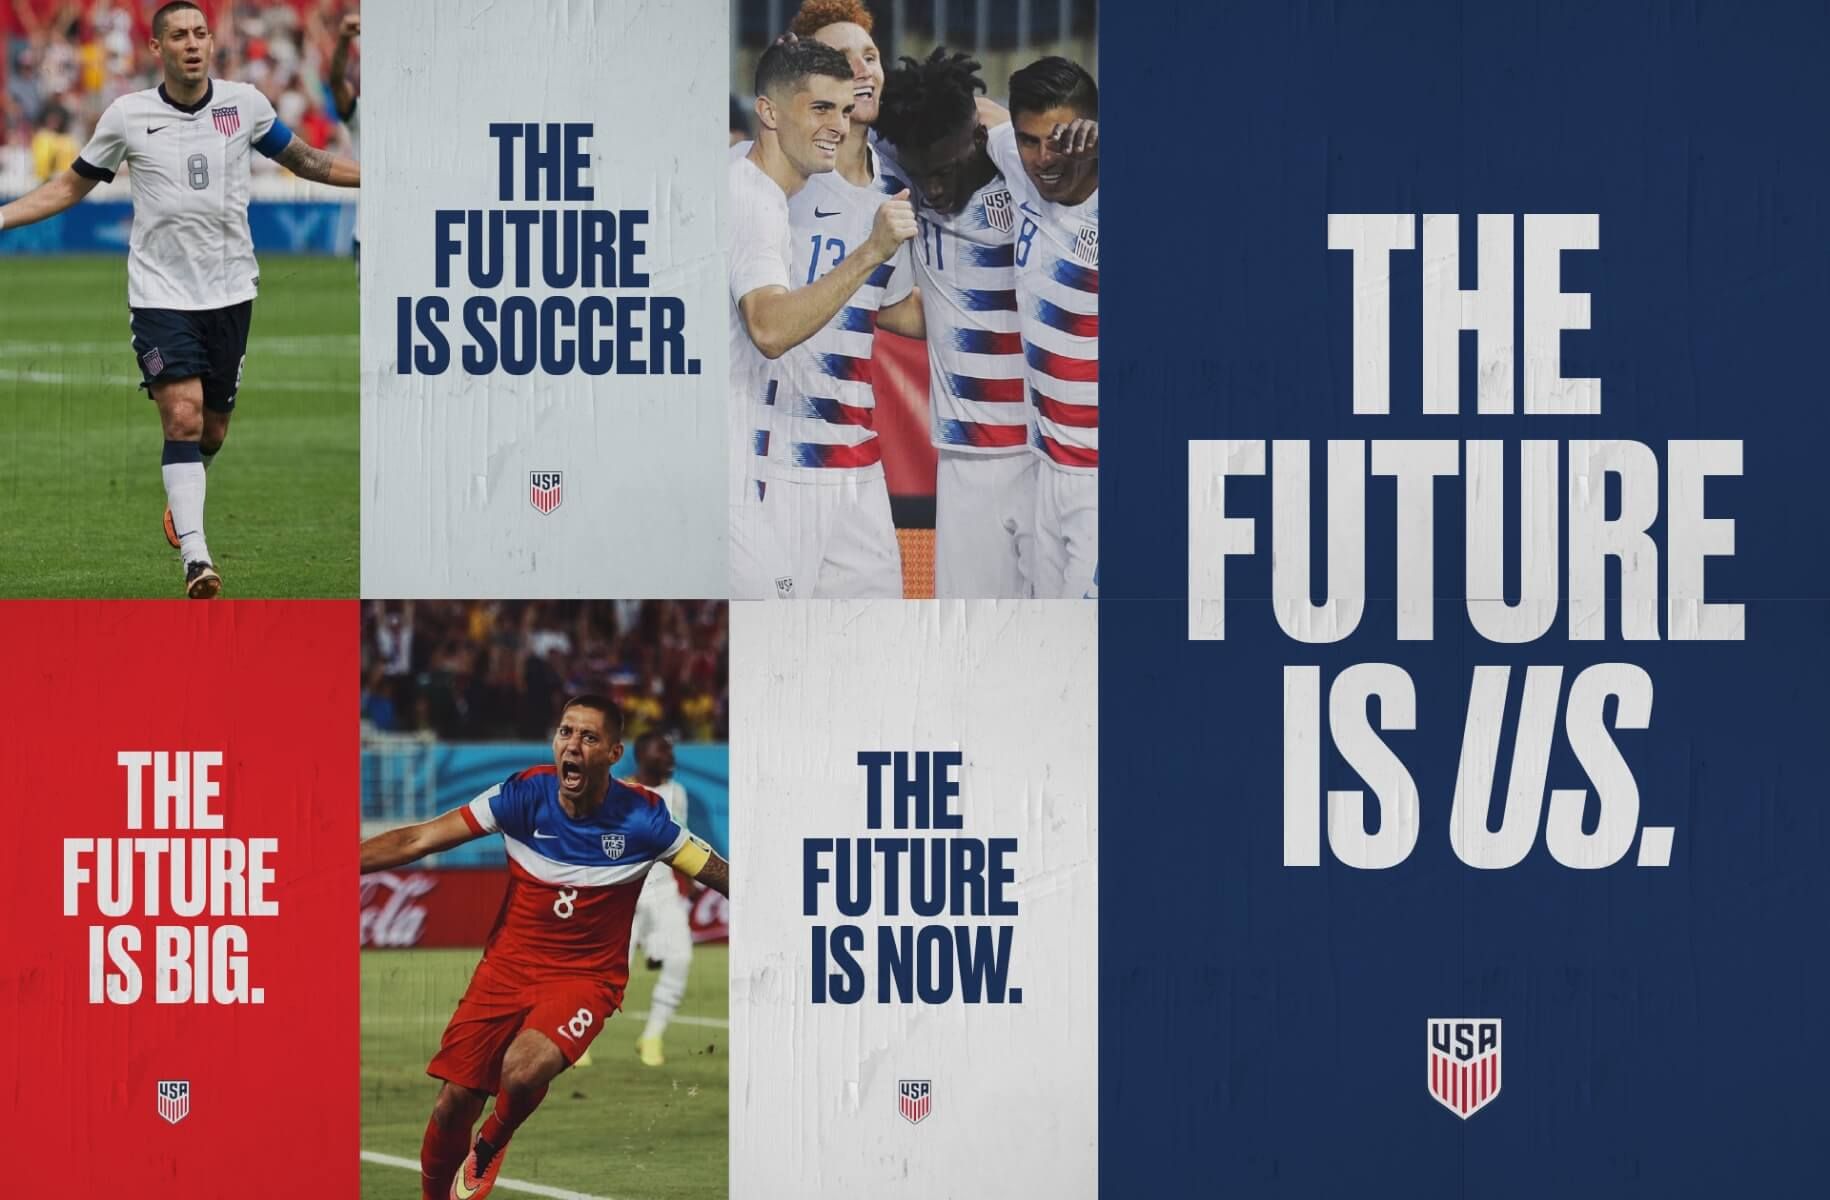 Grid of soccer players and text blocks. The Future is Soccer. The future is big. The future is now. The future is us.